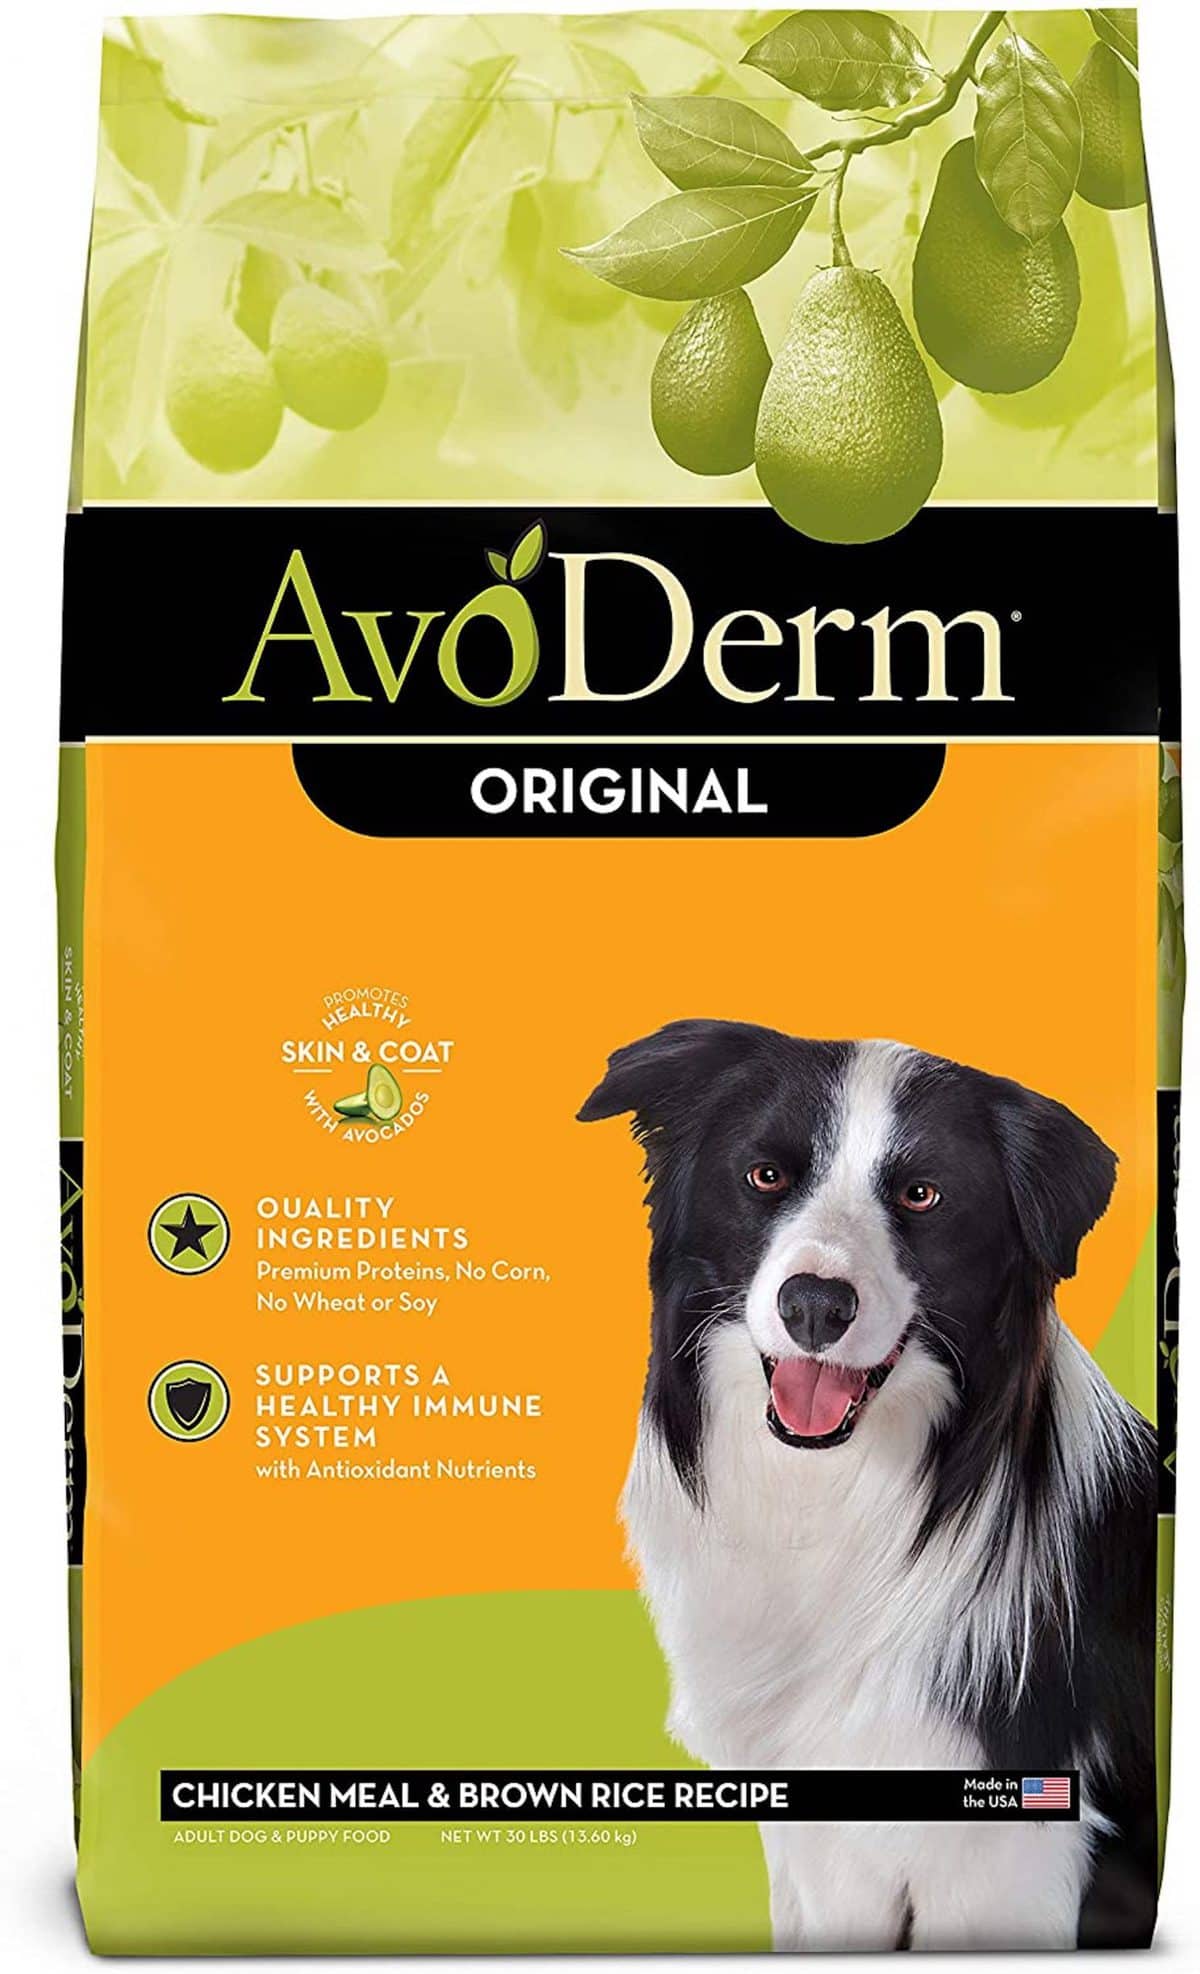 6 Best Dog Foods For Dry Skin: Healthy Skin for Your Pooch!